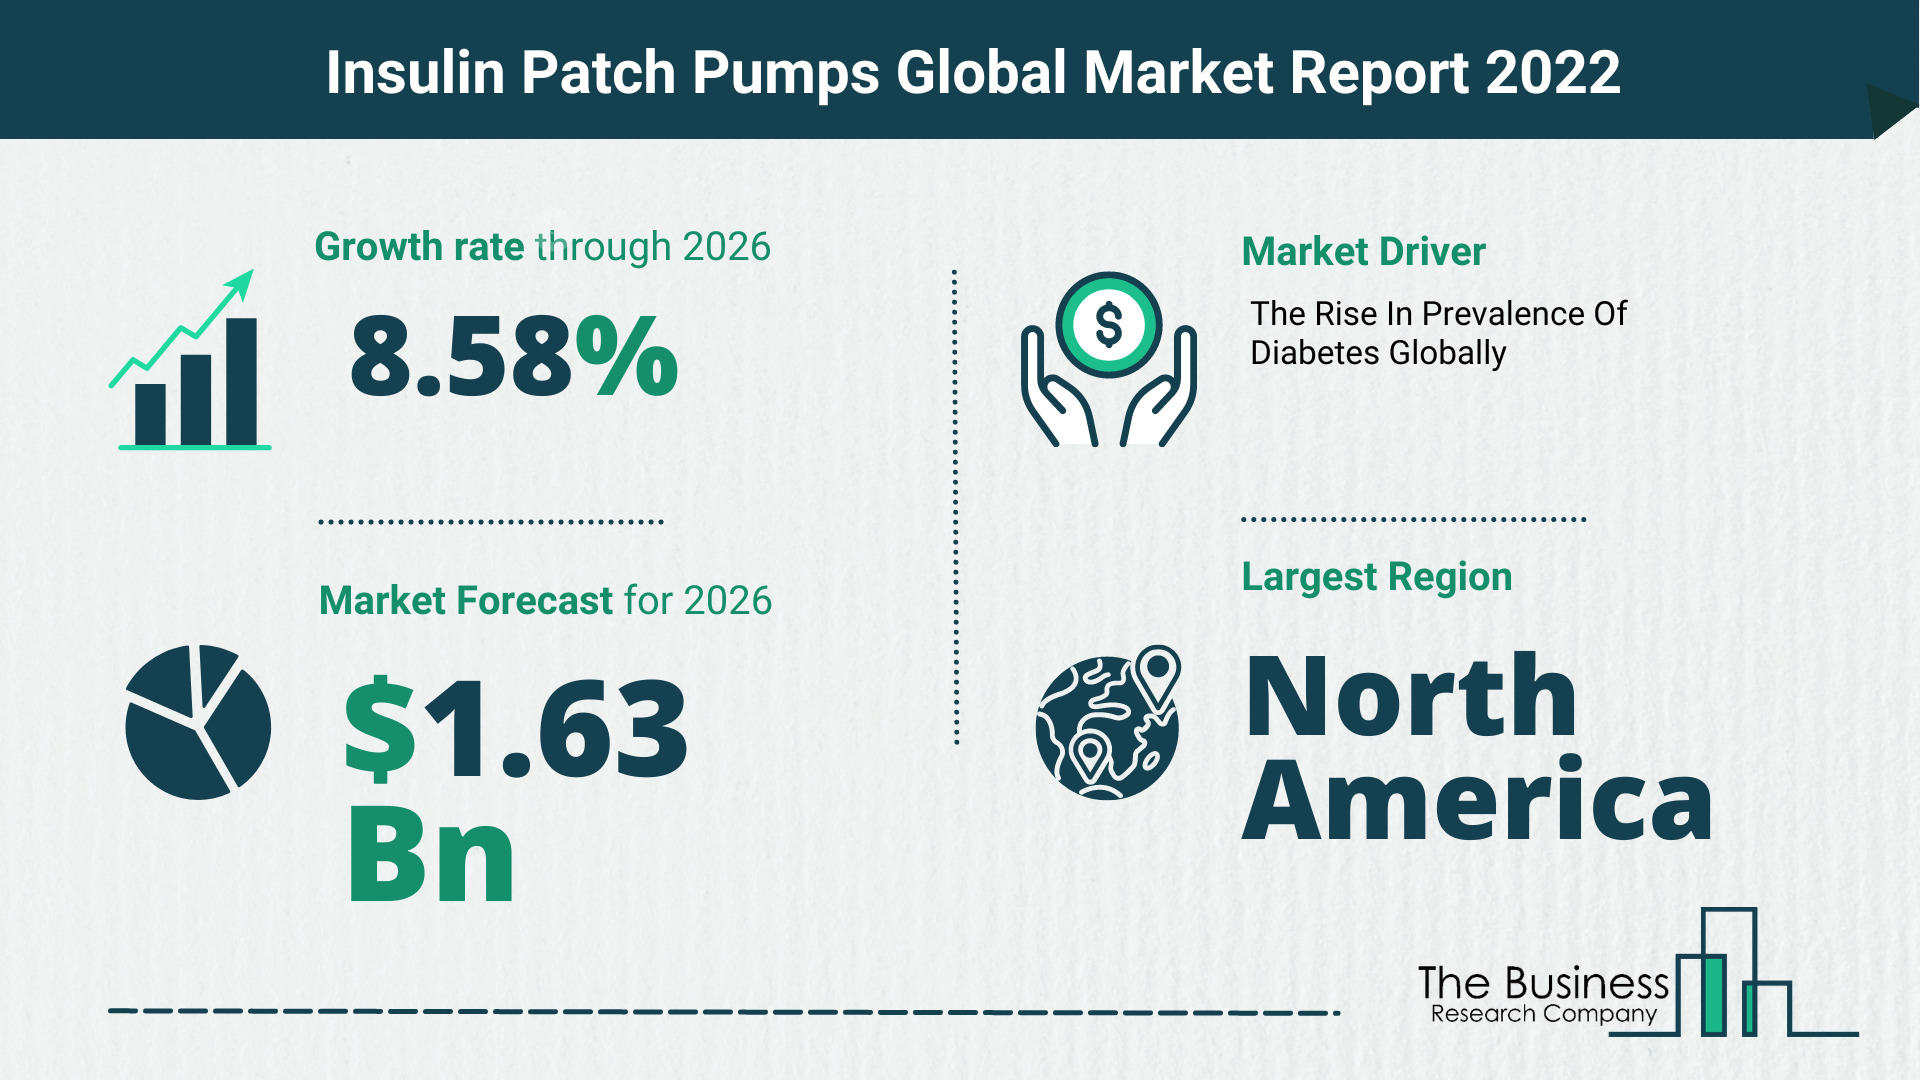 What Is The Insulin Patch Pumps Market Overview In 2022?